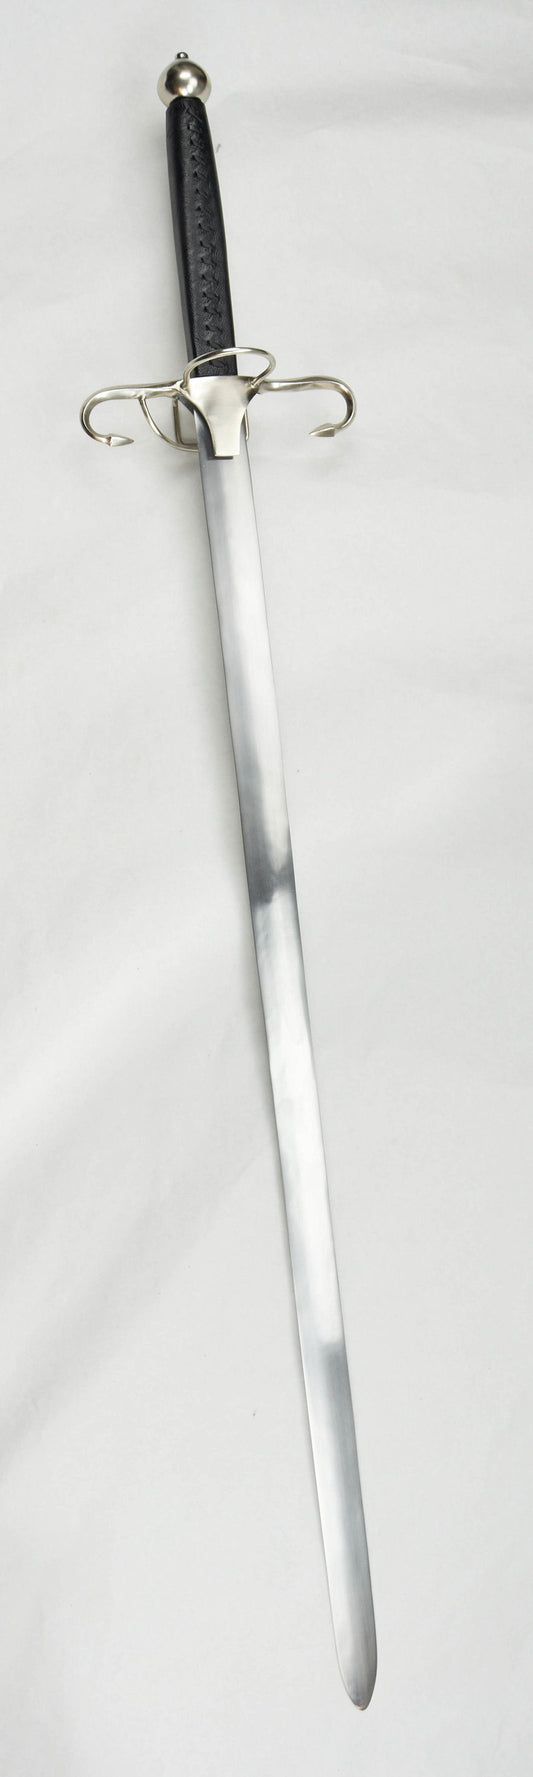 blakc and silver Wallace Greatsword